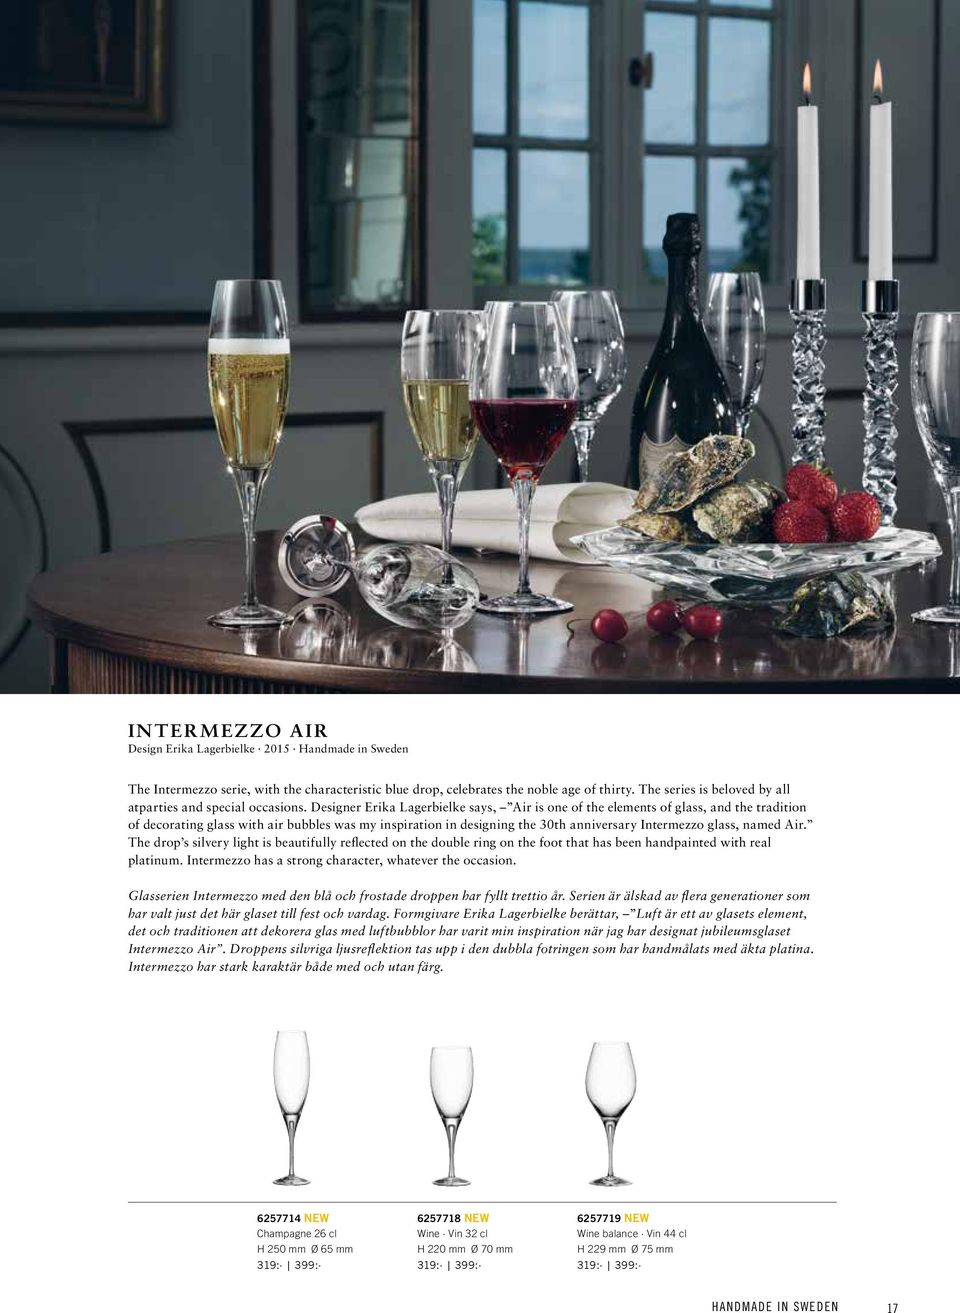 Designer Erika Lagerbielke says, Air is one of the elements of glass, and the tradition of decorating glass with air bubbles was my inspiration in designing the 30th anniversary Intermezzo glass,